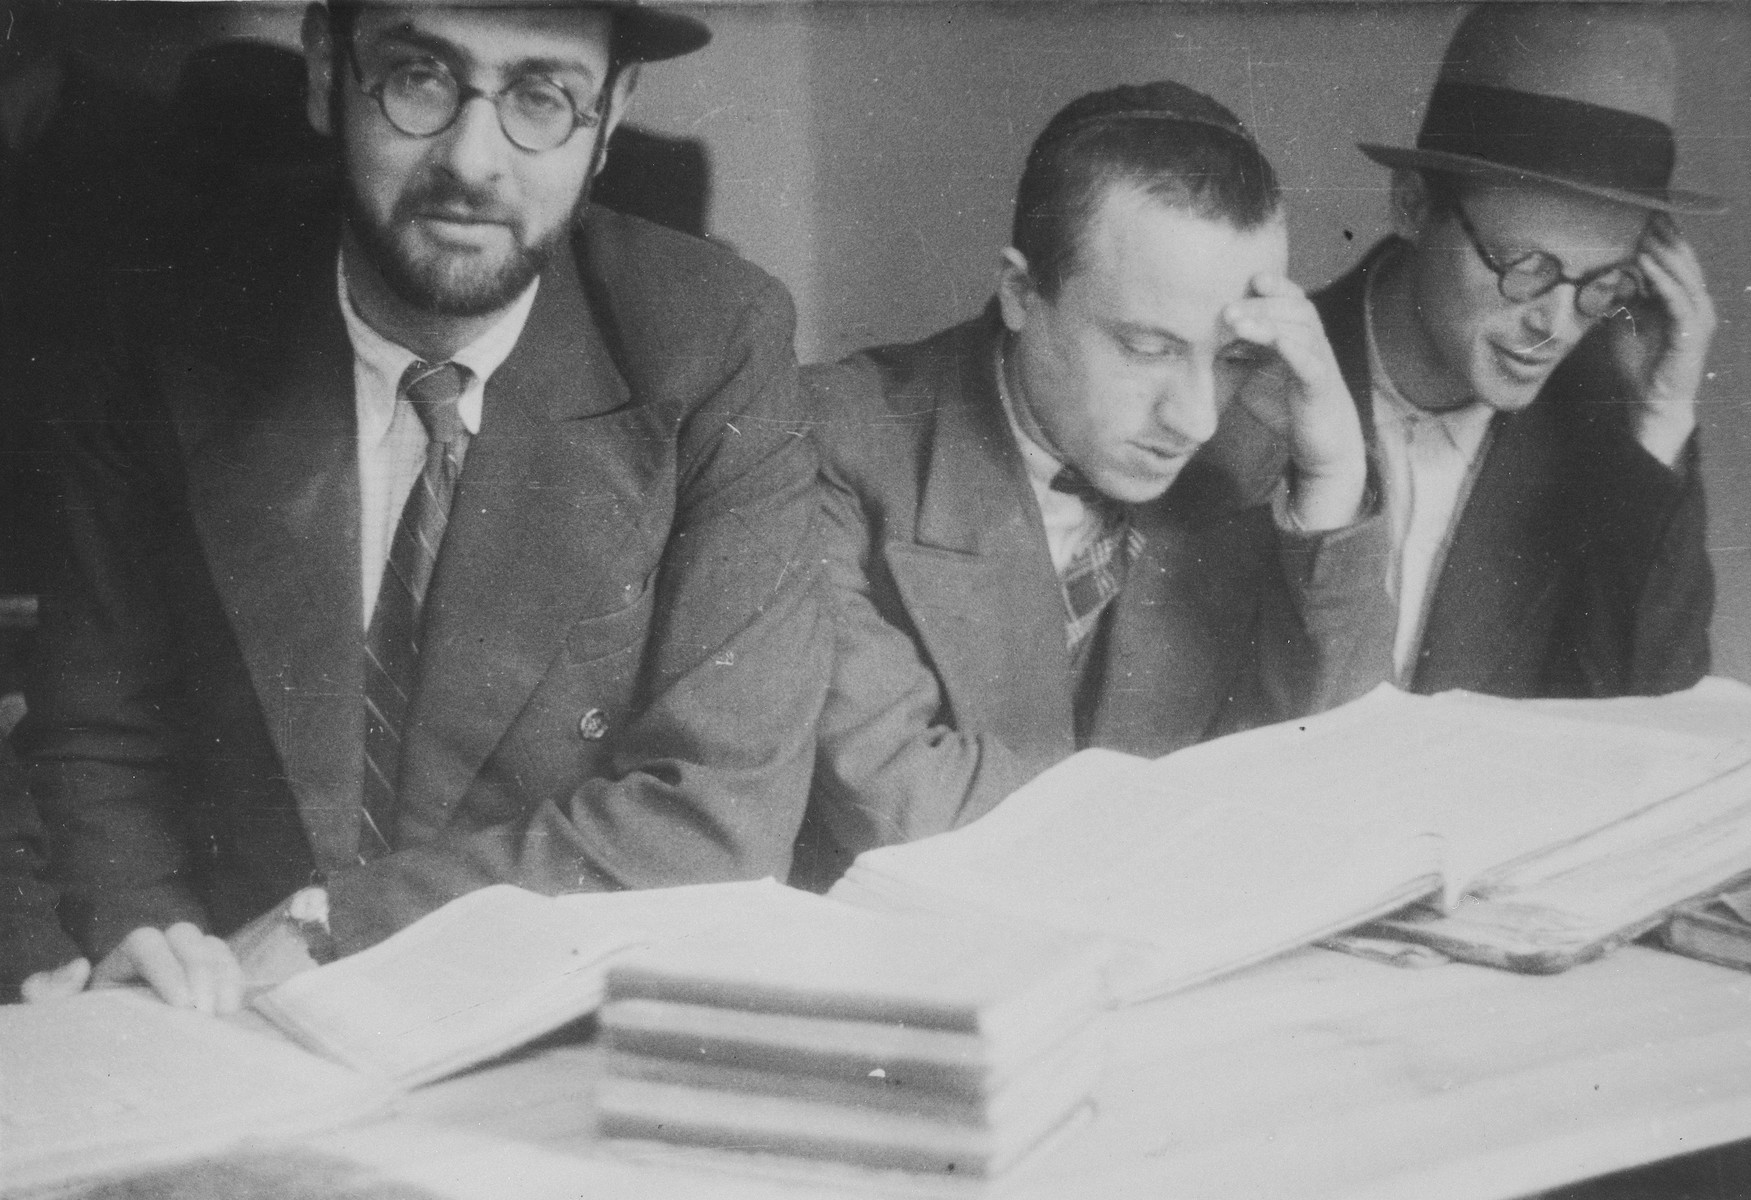 Students at the Mir Yeshiva in Kobe study around a table.

Elchanan Yosef Hertzman is on the right and Boruch Yaakov Alter is in the middle.